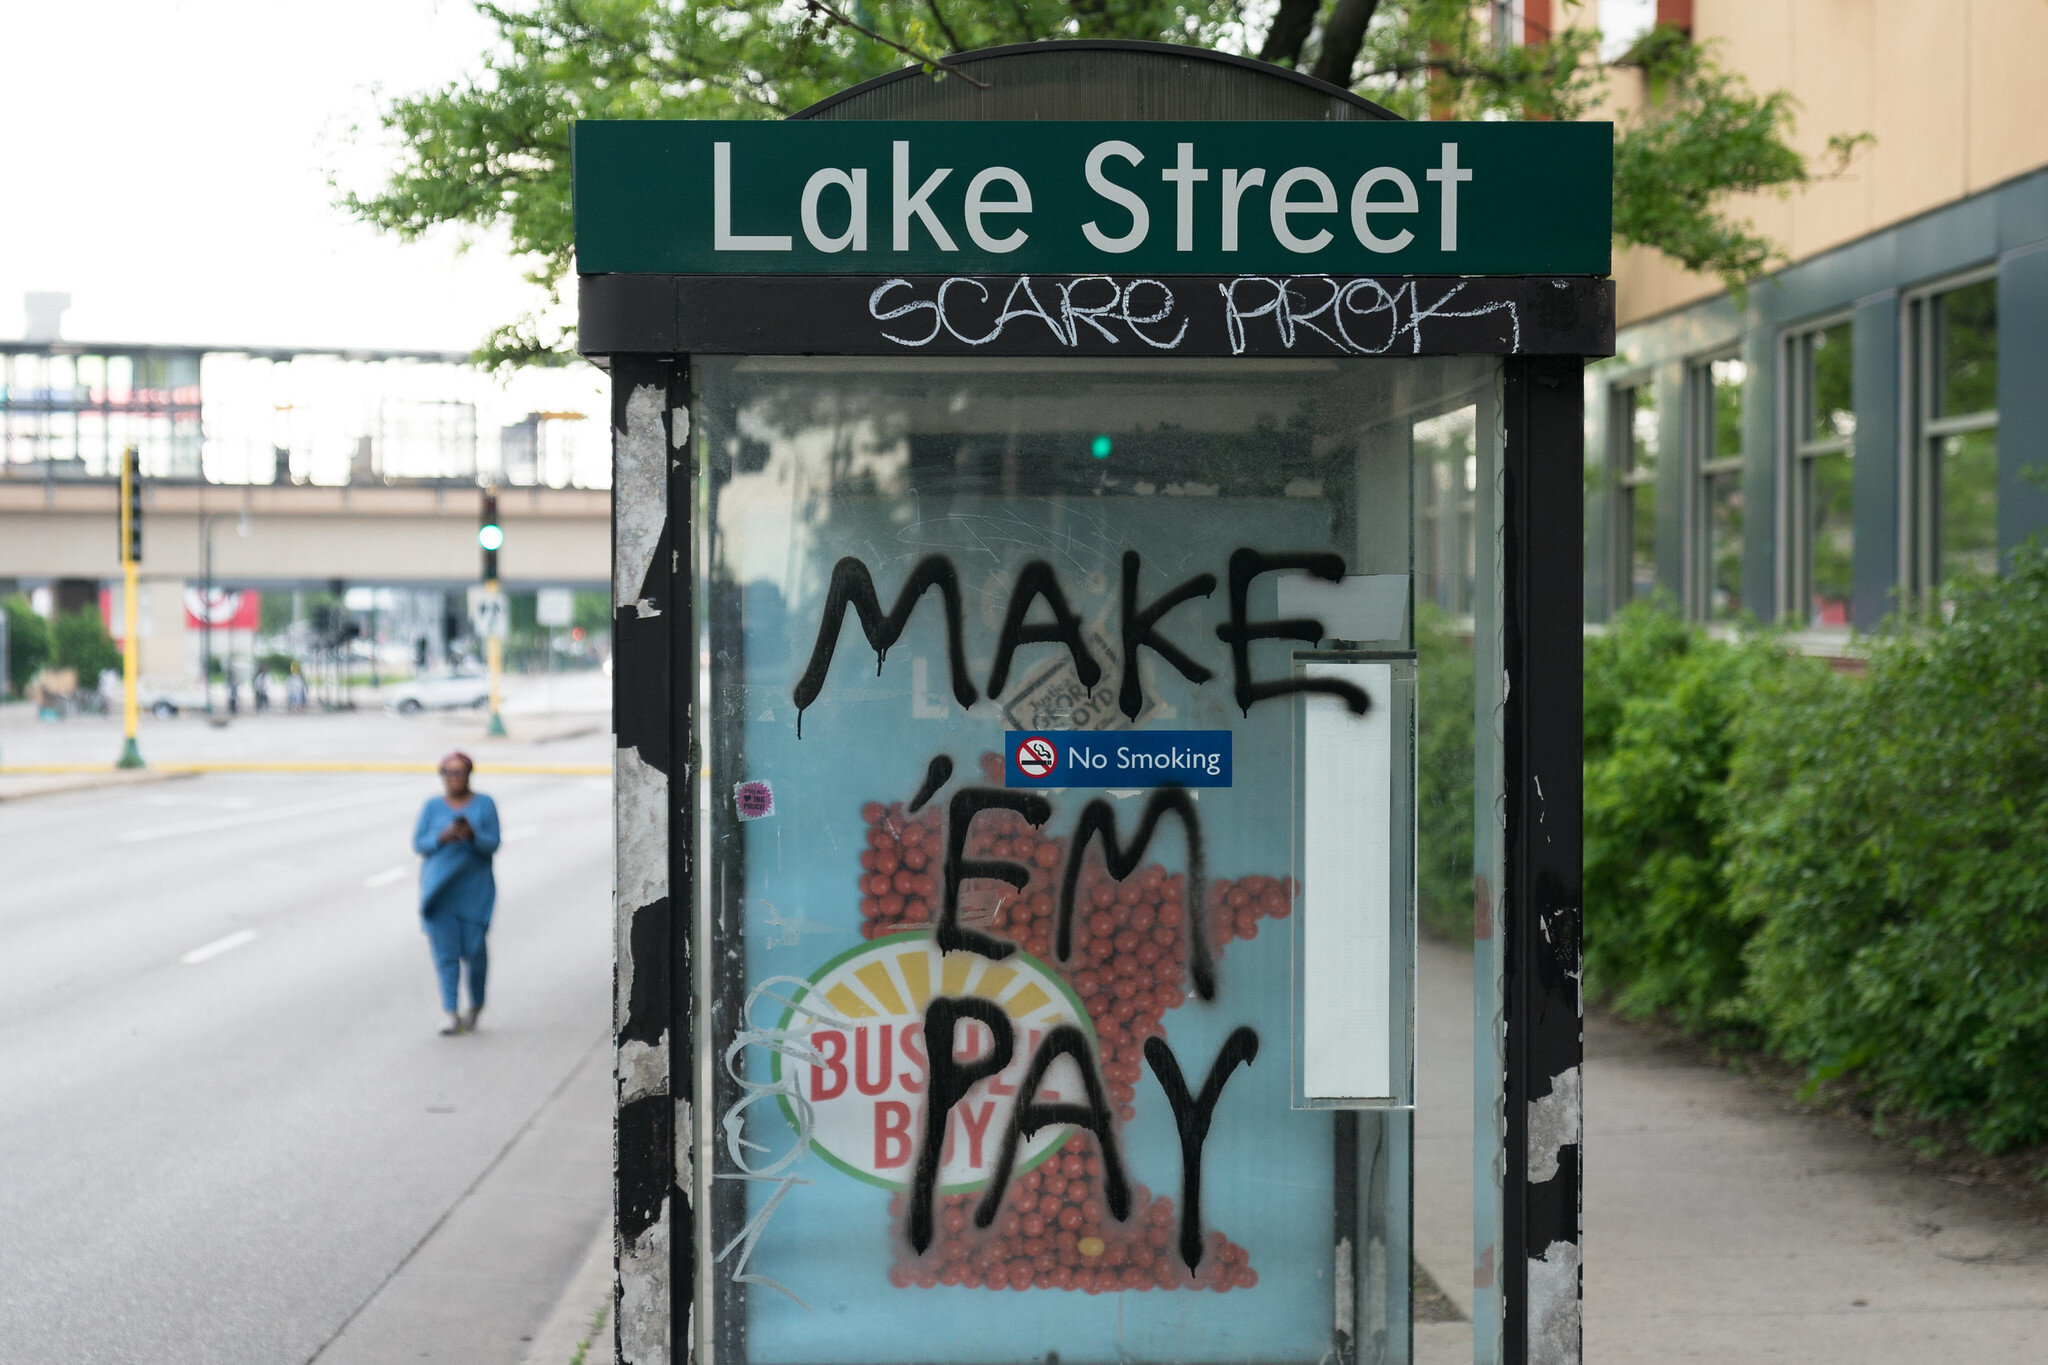  Make 'Em Pay graffiti at a bus stop on Lake Street on Thursday morning after a night of protests in Minneapolis, Minnesota 